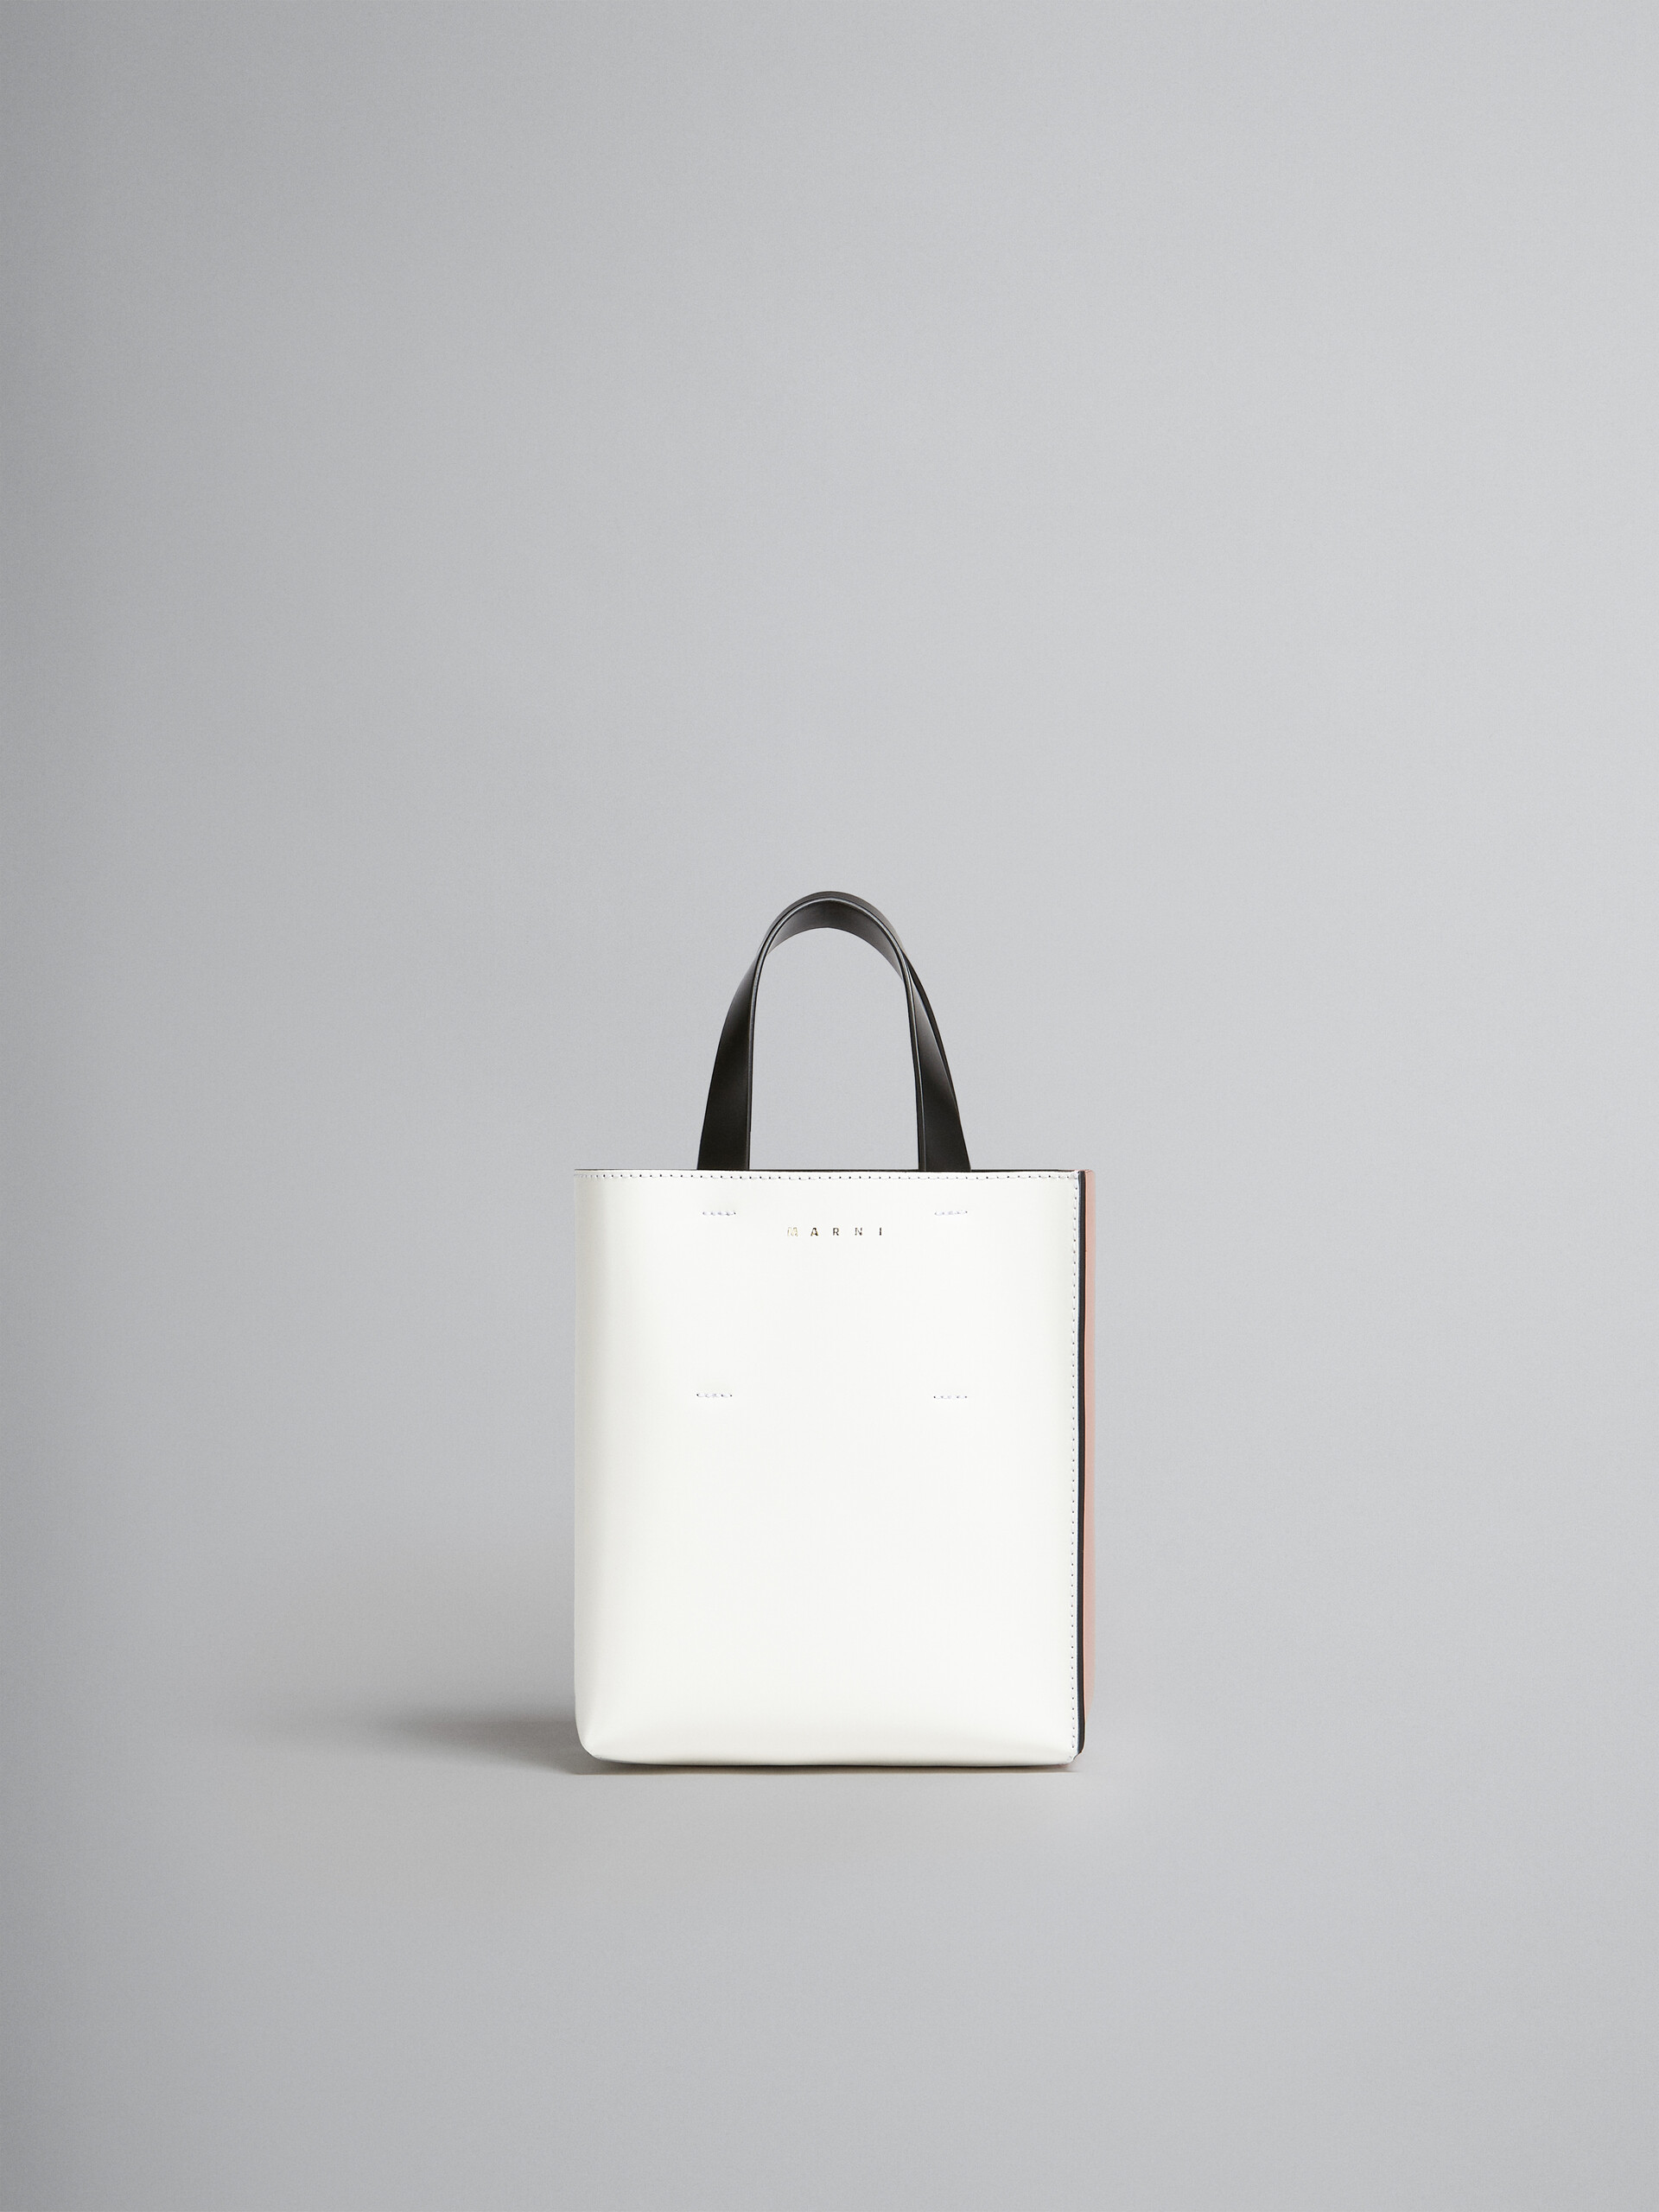 Museo Mini Bag in pink white and black leather - Shopping Bags - Image 1